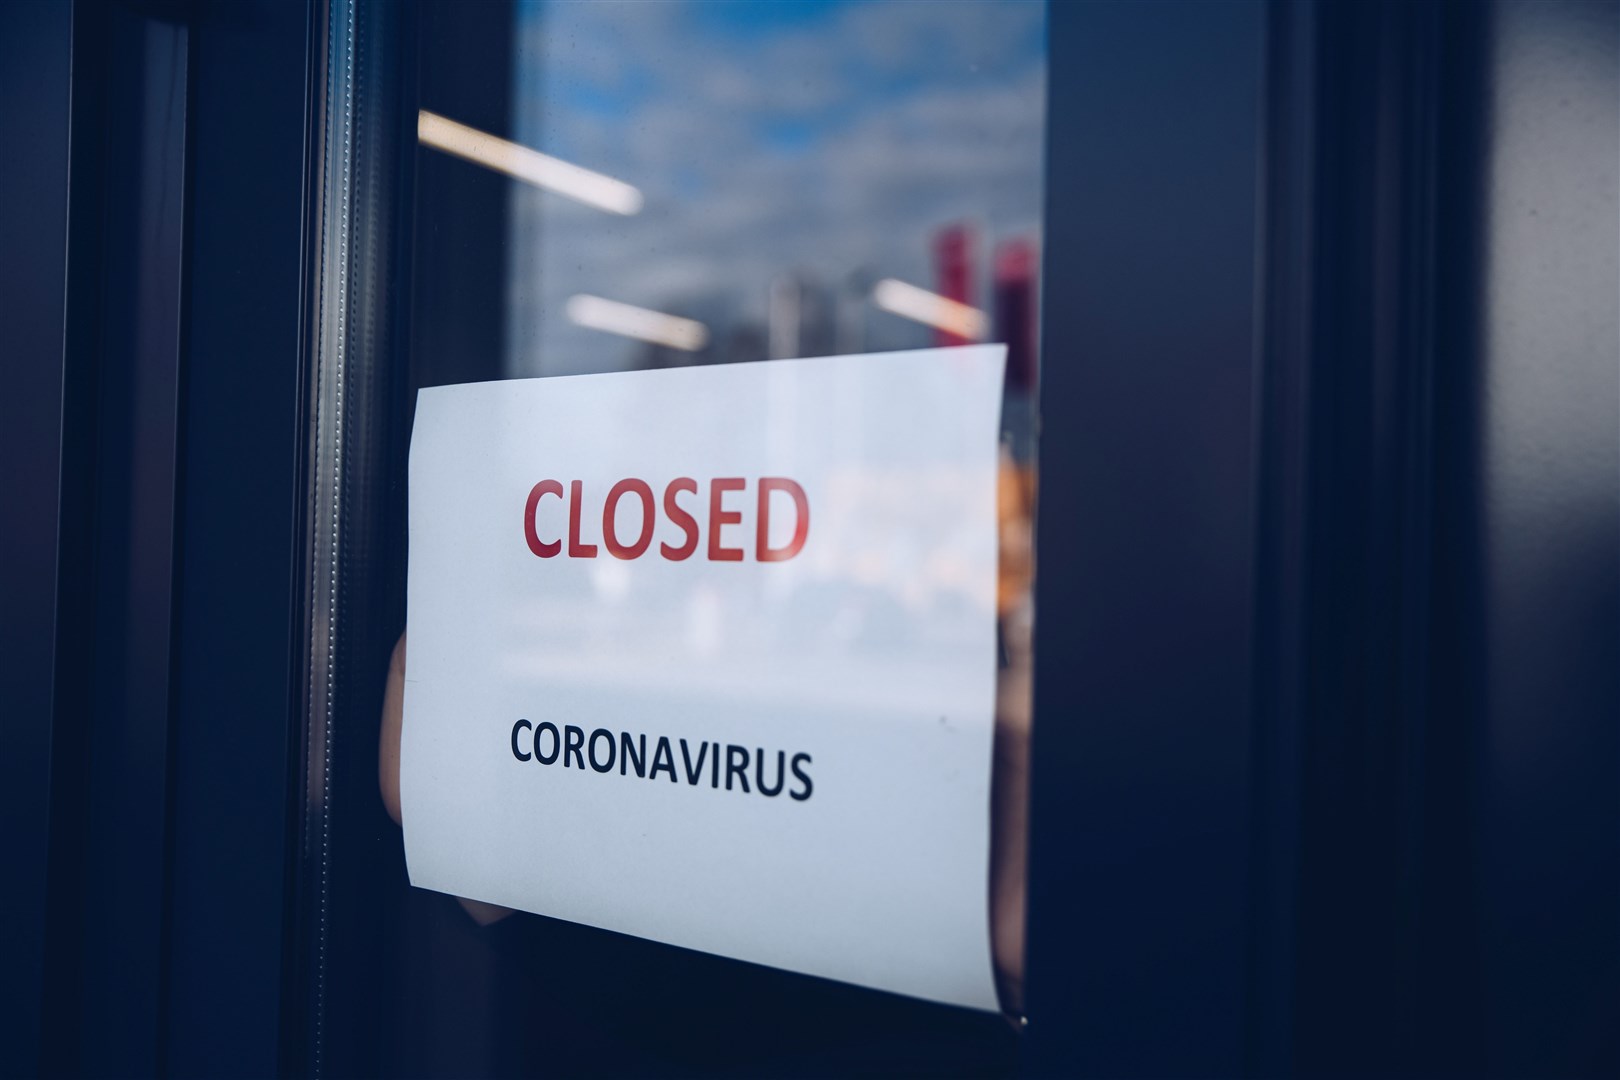 One of the many businesses which closed as a result of the coronavirus pandemic.